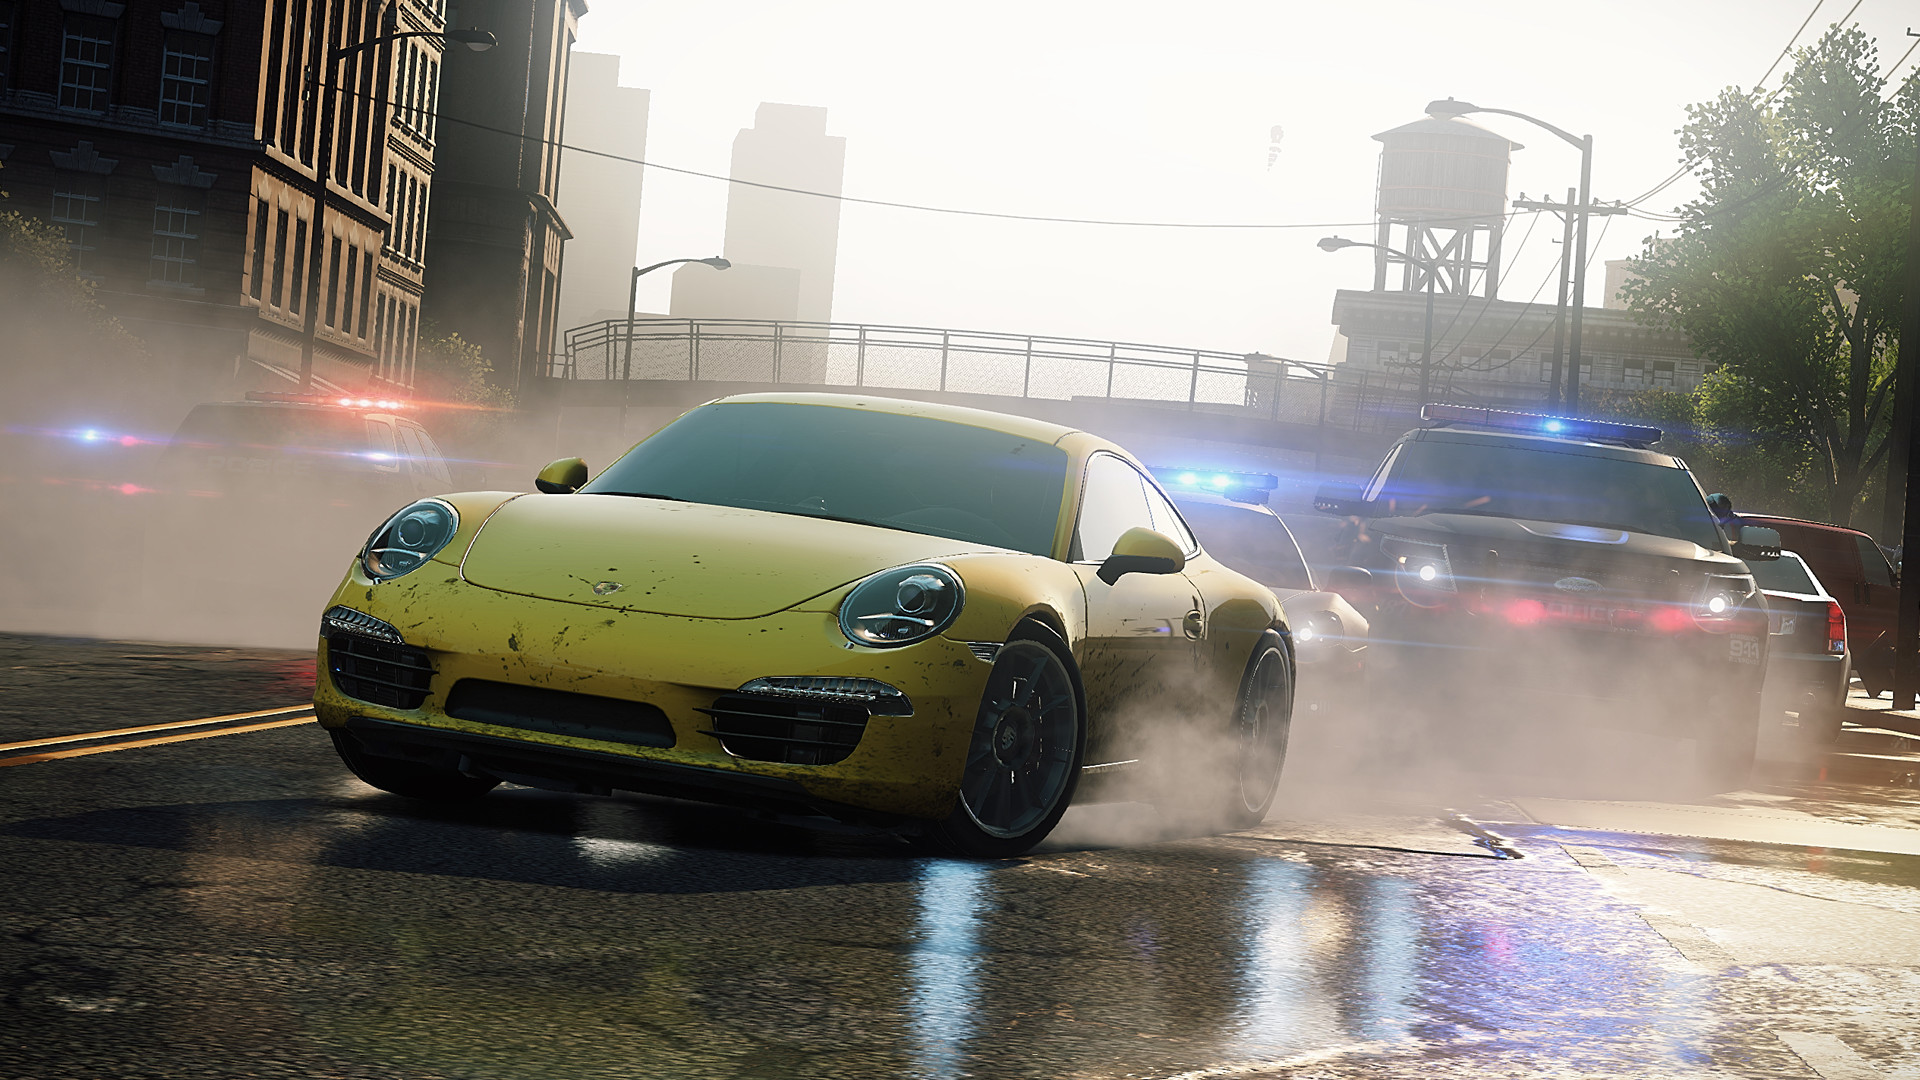 All Need For Speed: Most Wanted jack spot locations | GamesRadar+